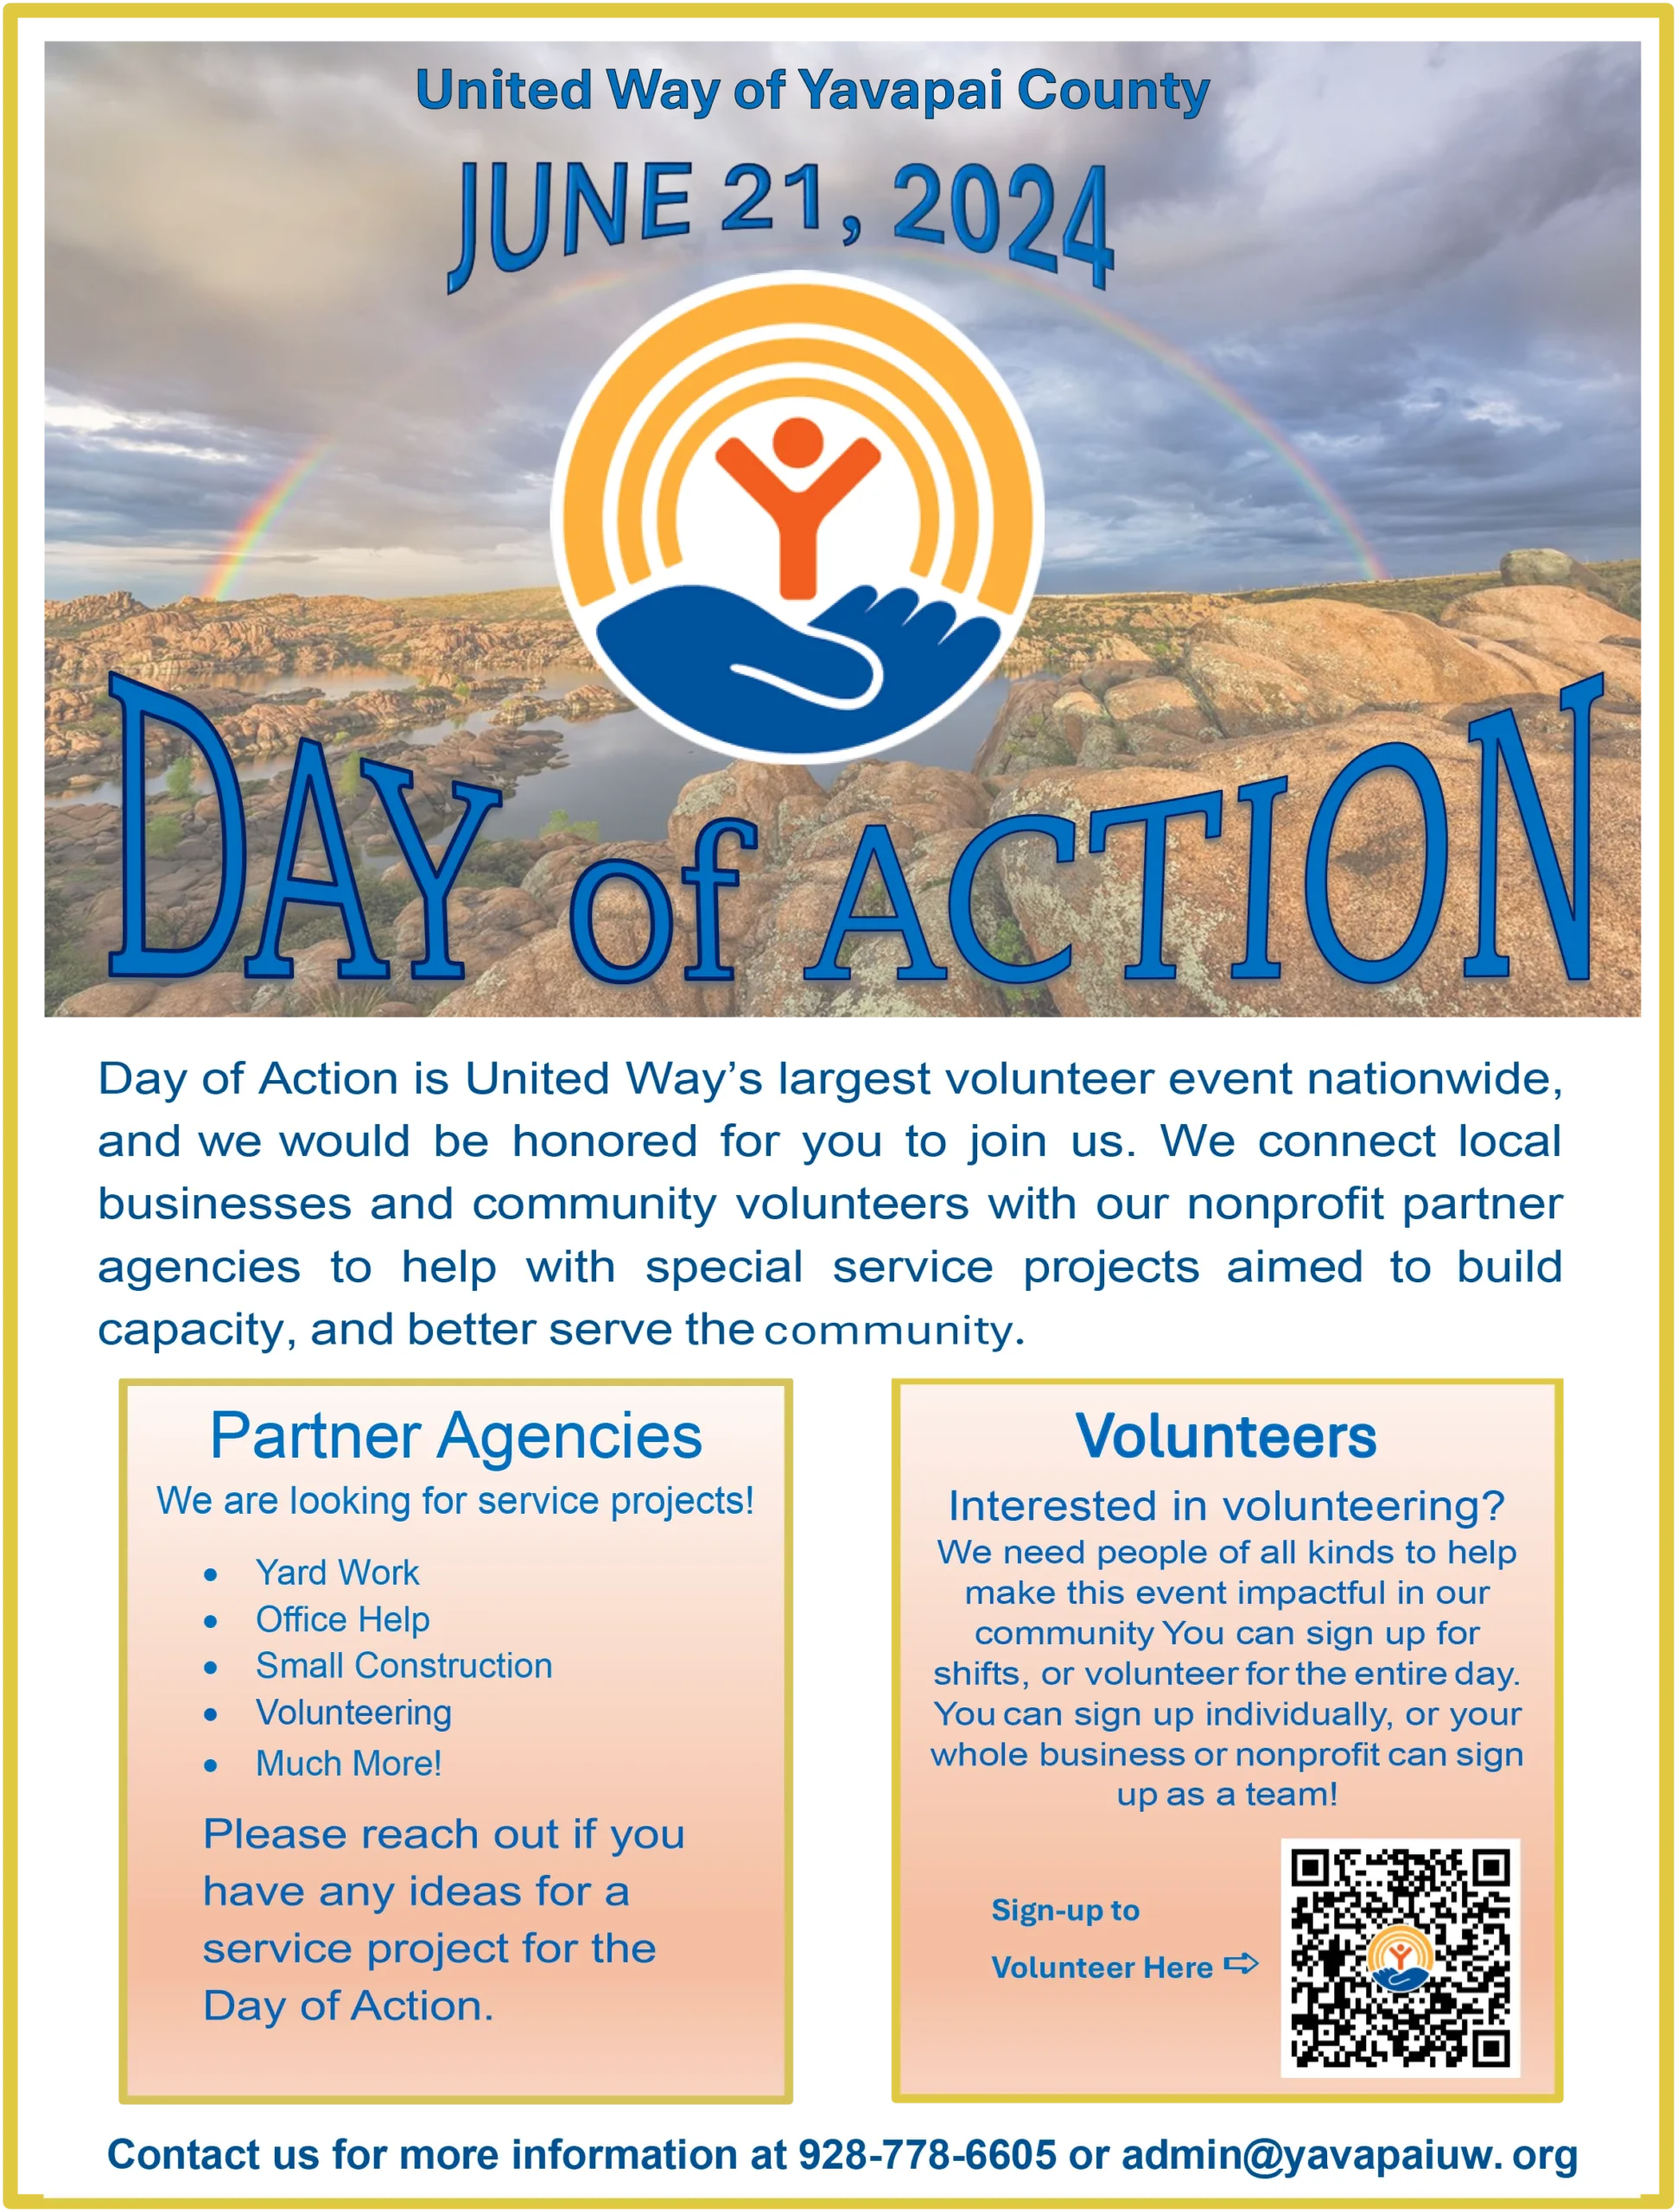 Day of Action - United Way Yavapai County